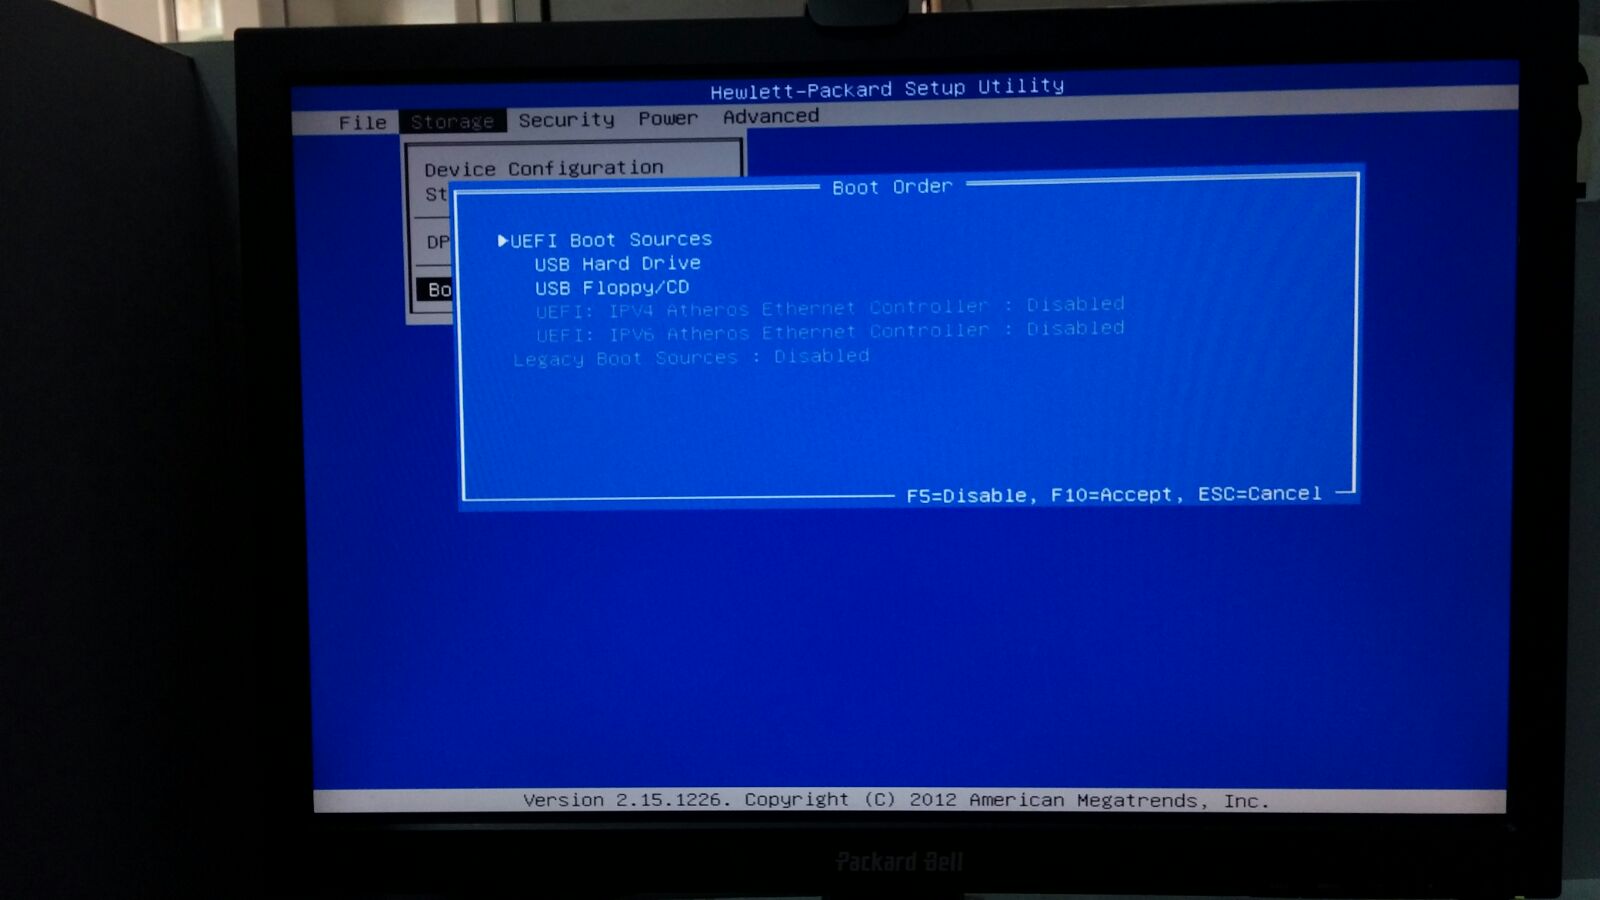 PXE Boot. Pxe over ipv4